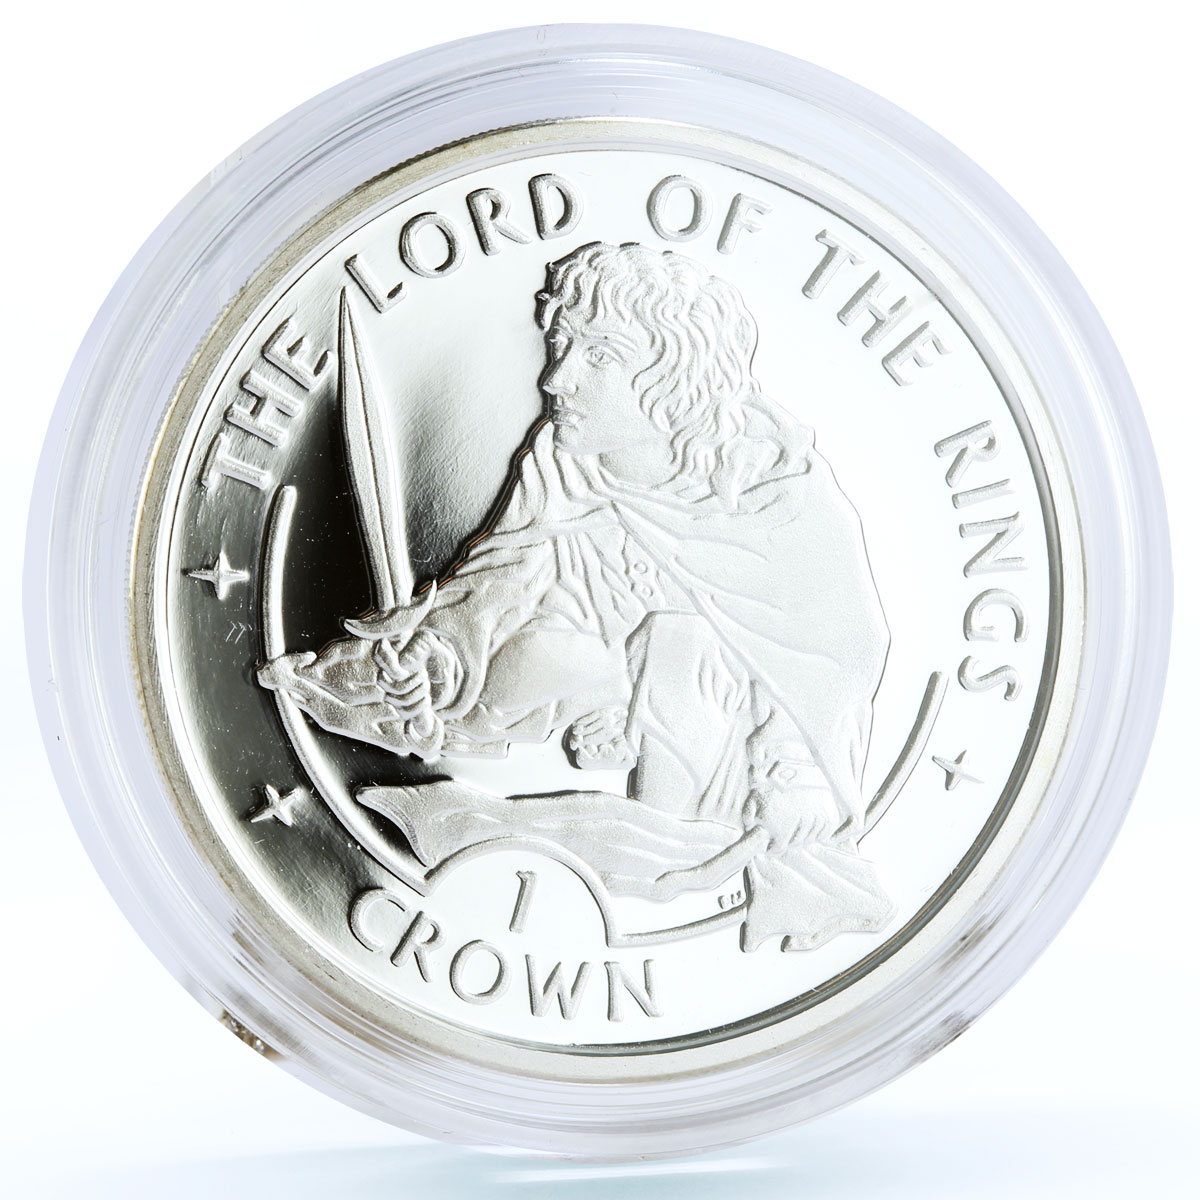 Isle of Man 1 crown Lord of the Rings Chobbit Frodo proof silver coin 2003